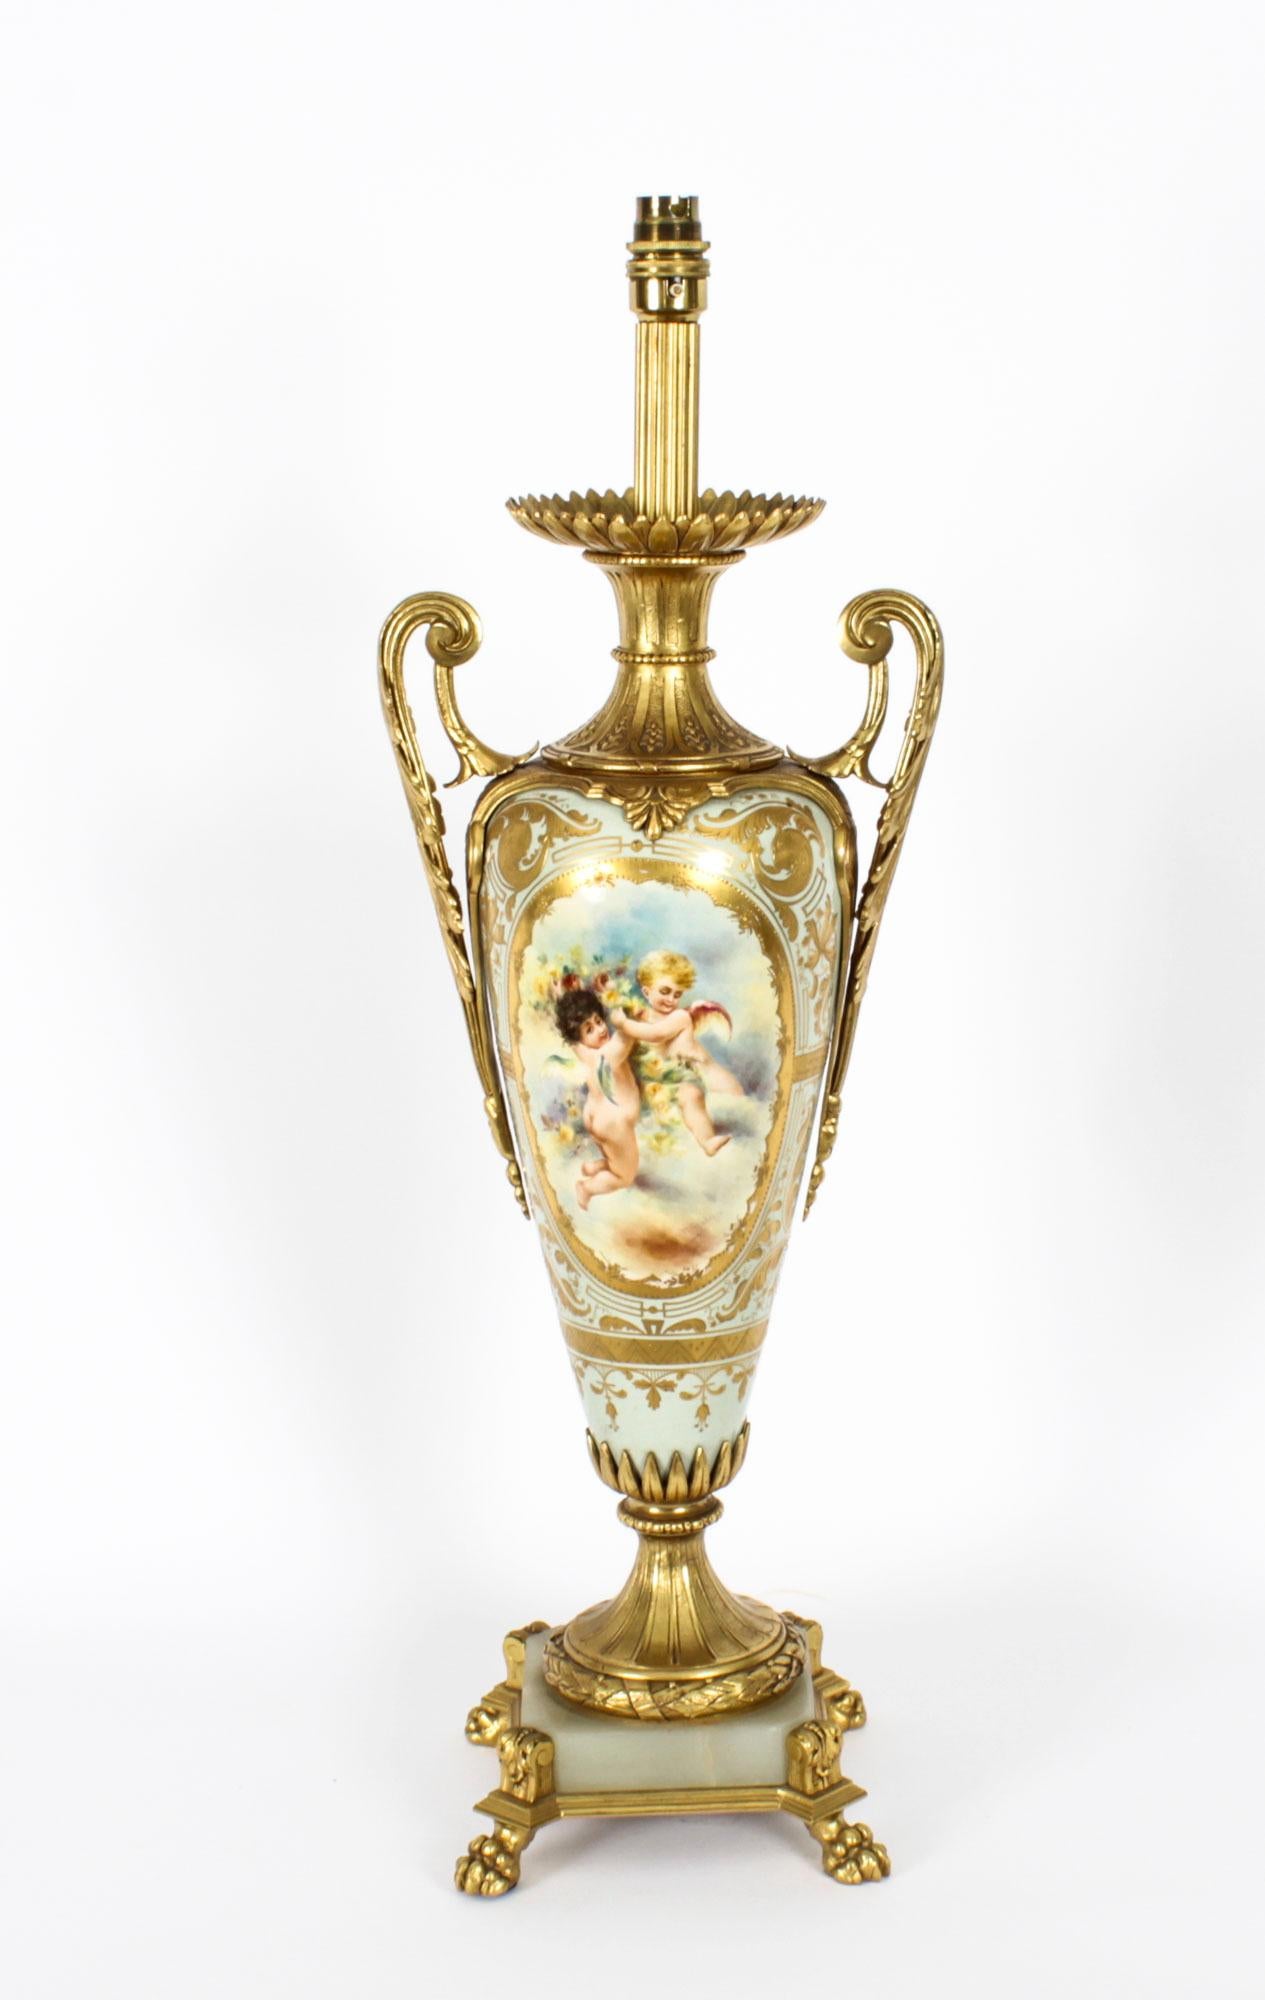 This is a stunning large antique French Sevres hand-painted porcelain and ormolu mounted vase circa 1870 in date, later converted into a lamp.
 
The ovoid porcelain body is painted with gilt-framed panels depicting finely painted cherubs at play